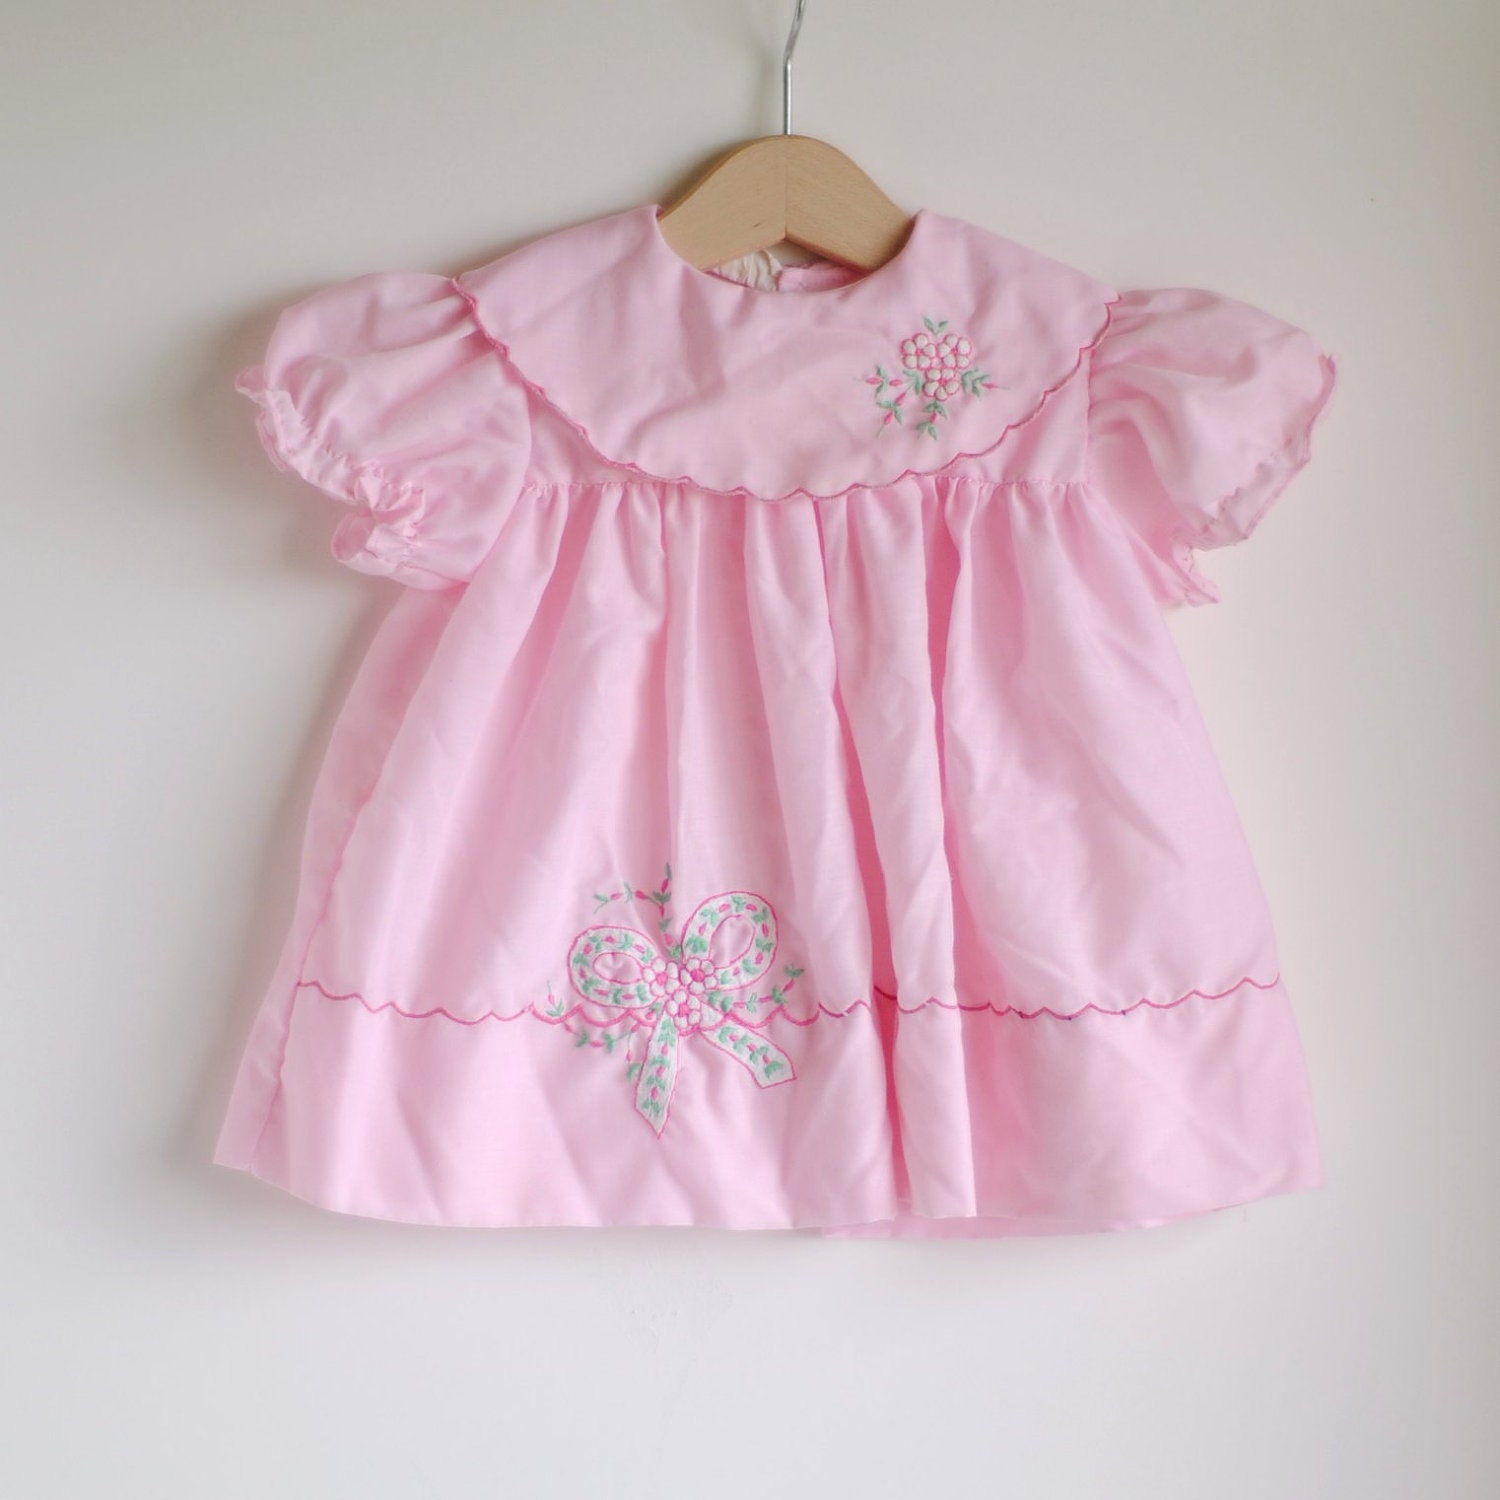 Vintage Baby Girl Dress - Pink with FLOWER BOW Scallop Collar (9m) - HartandSew